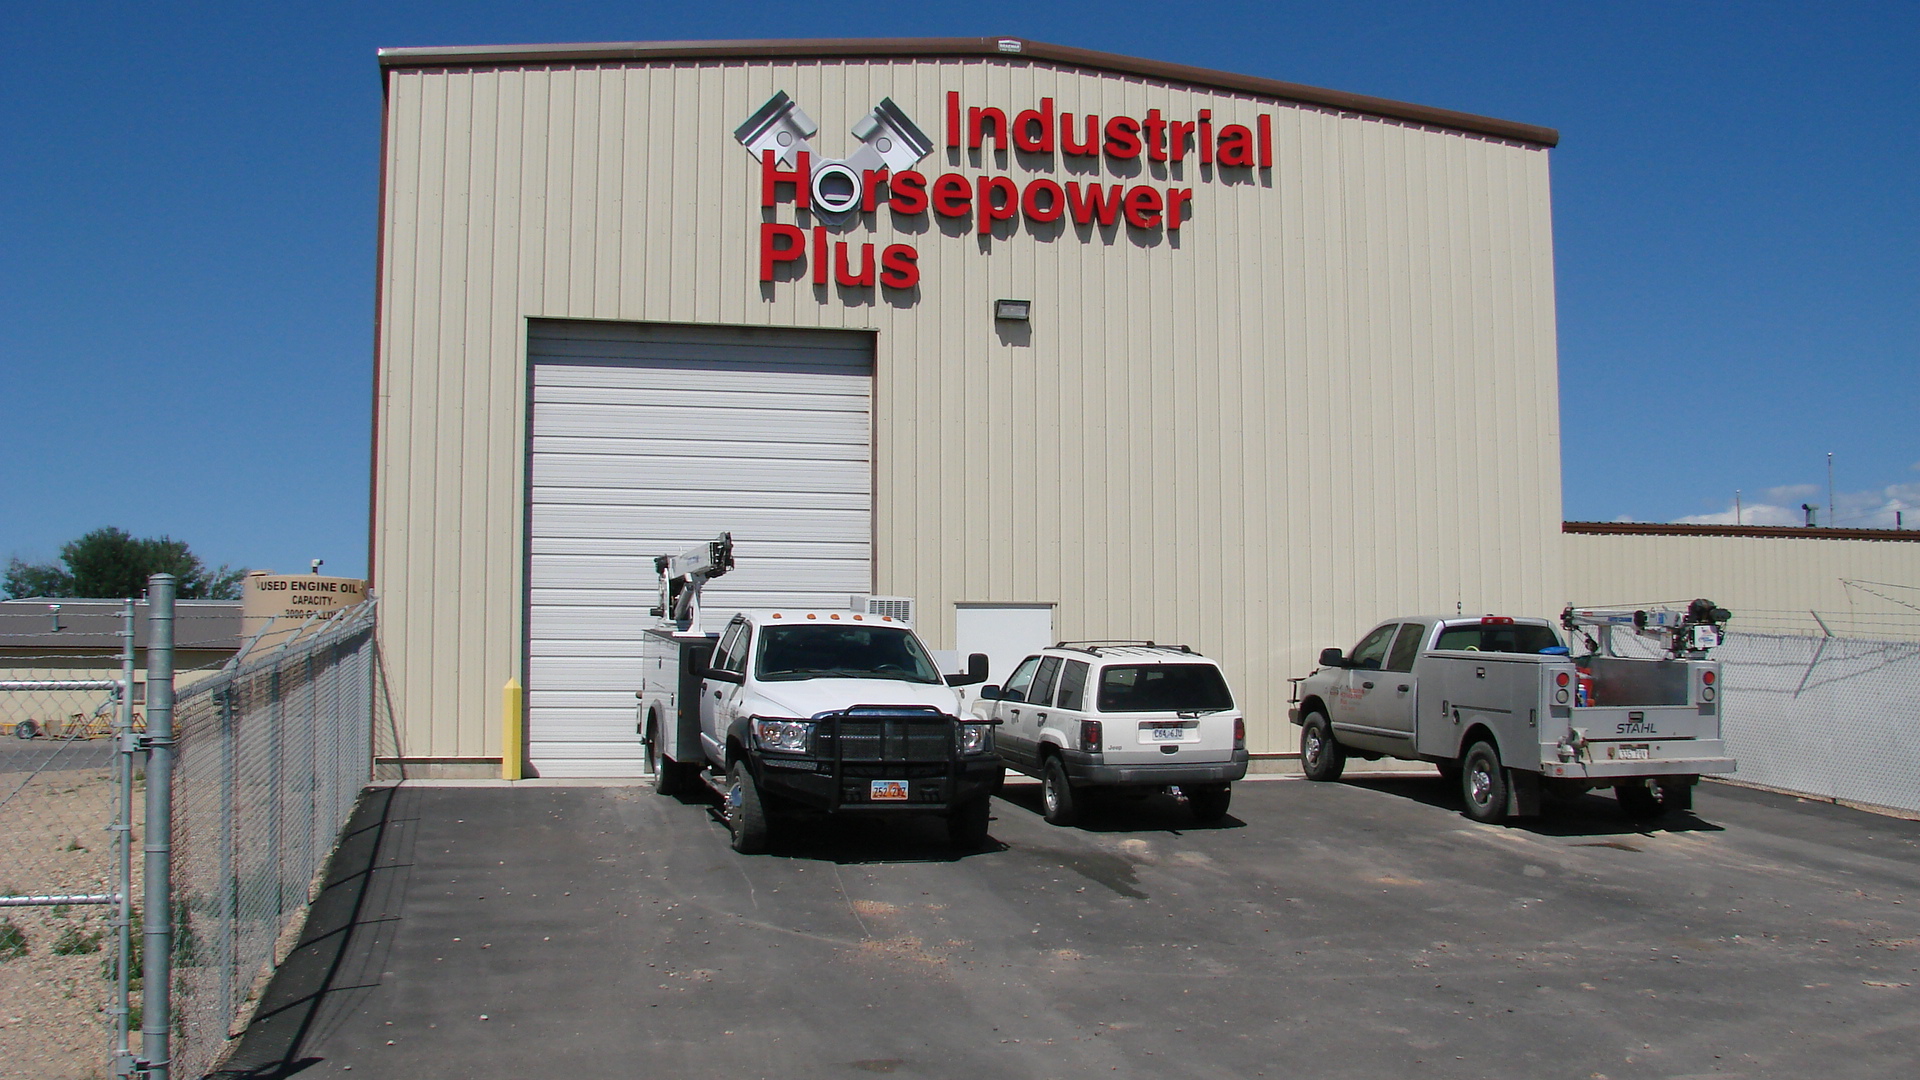 Industrial Horsepower Plus back side of the shop.